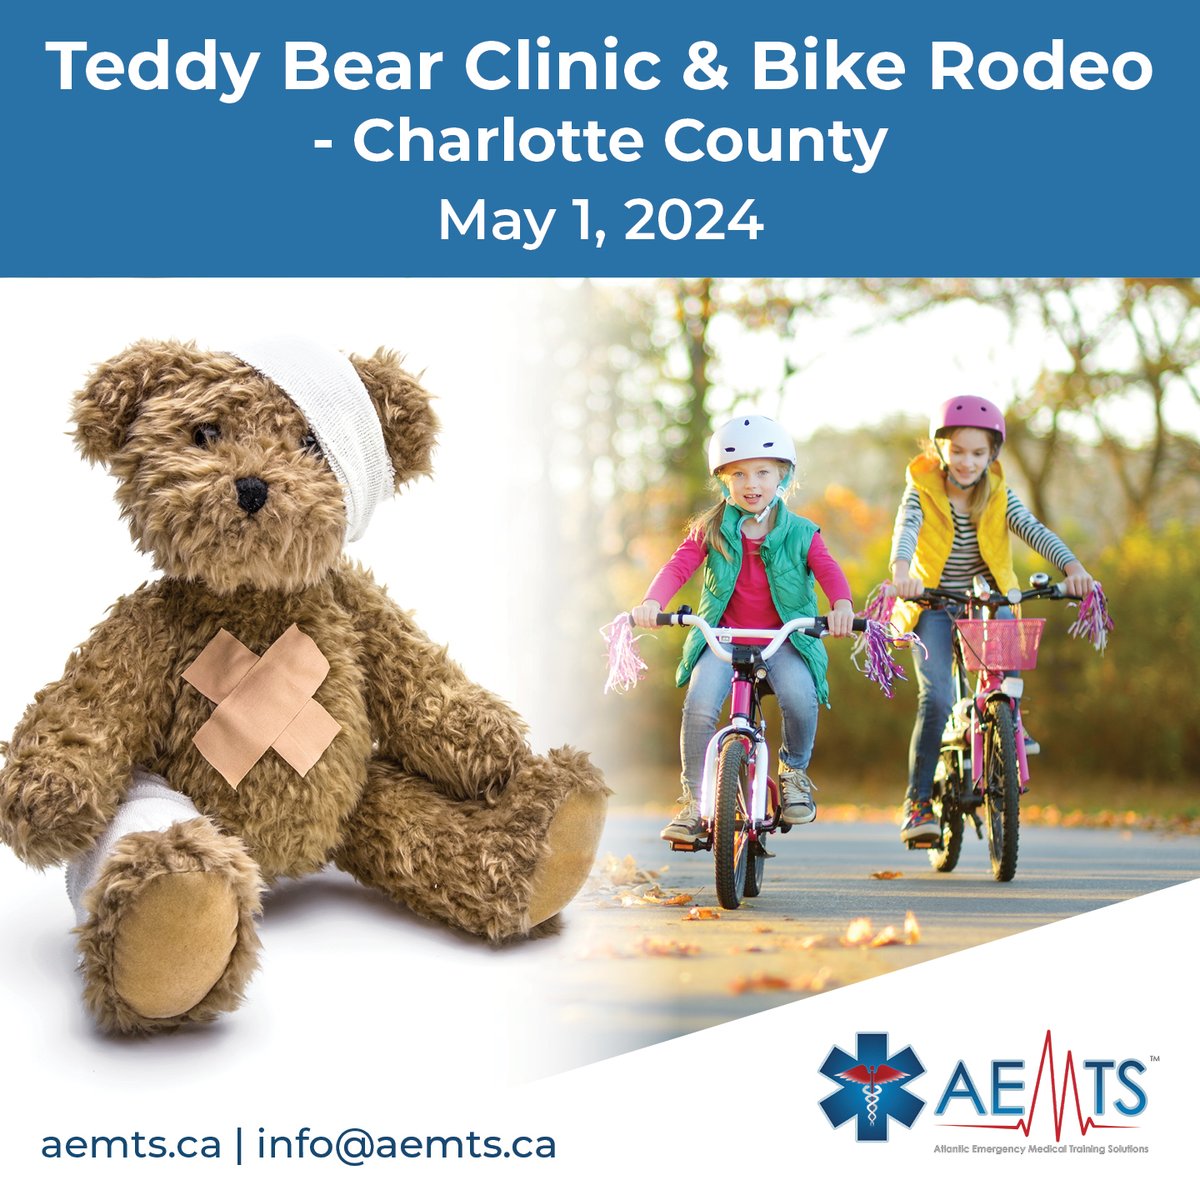 🧸🚑 Join us for a heartwarming event! 🚲🐻 Teddy Bear Clinic & Bike Rodeo in Blacks Harbour, NB, May 1, 2024, 6-7:30 p.m. Fun for the whole family! #TeddyBearClinic #BikeRodeo #BlacksHarbour #NBEvents